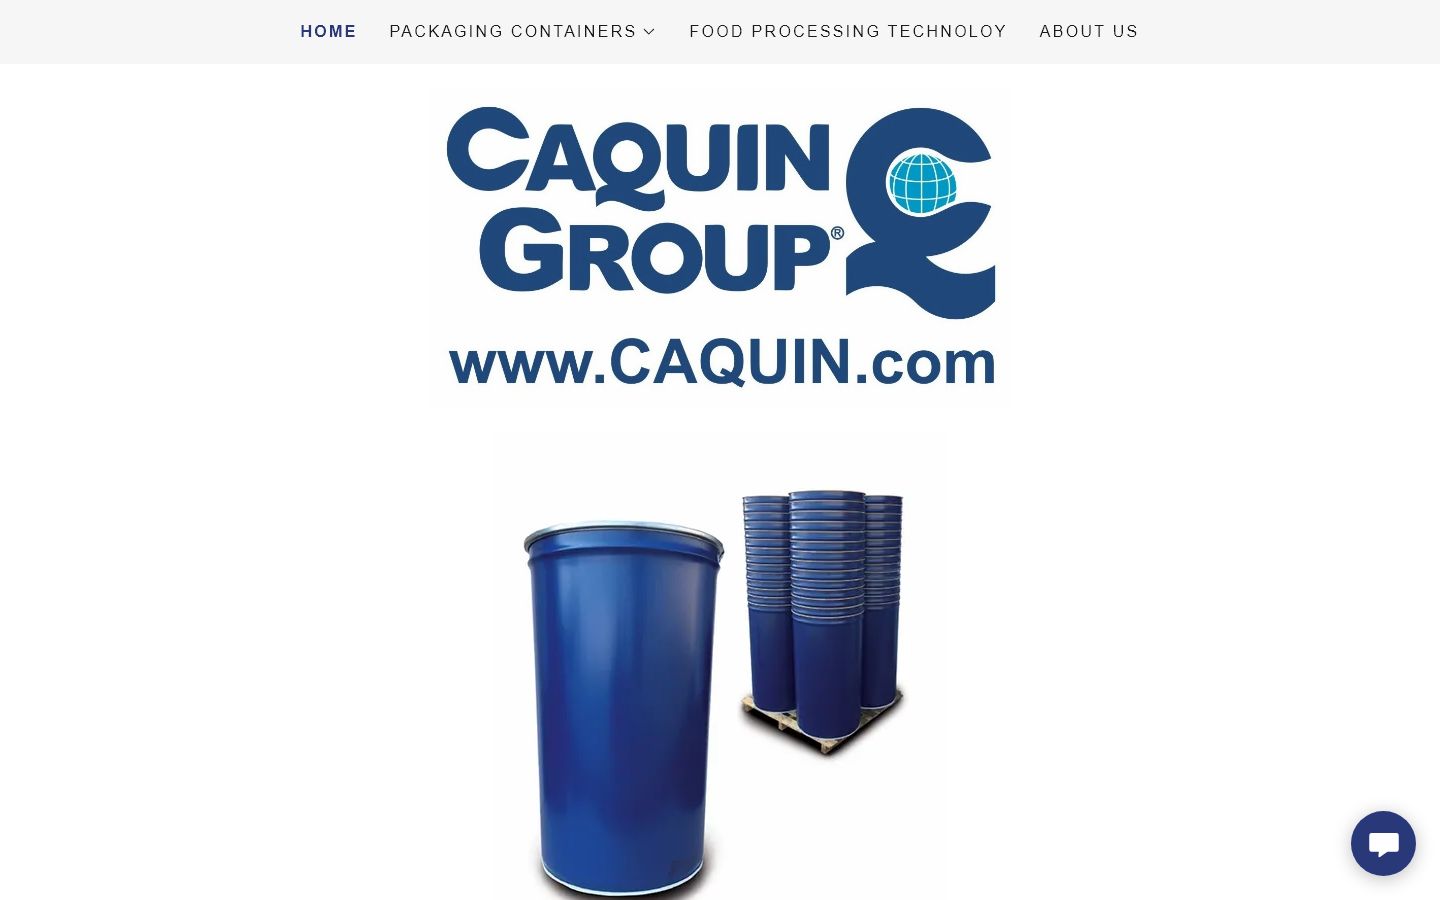 Caquin Group